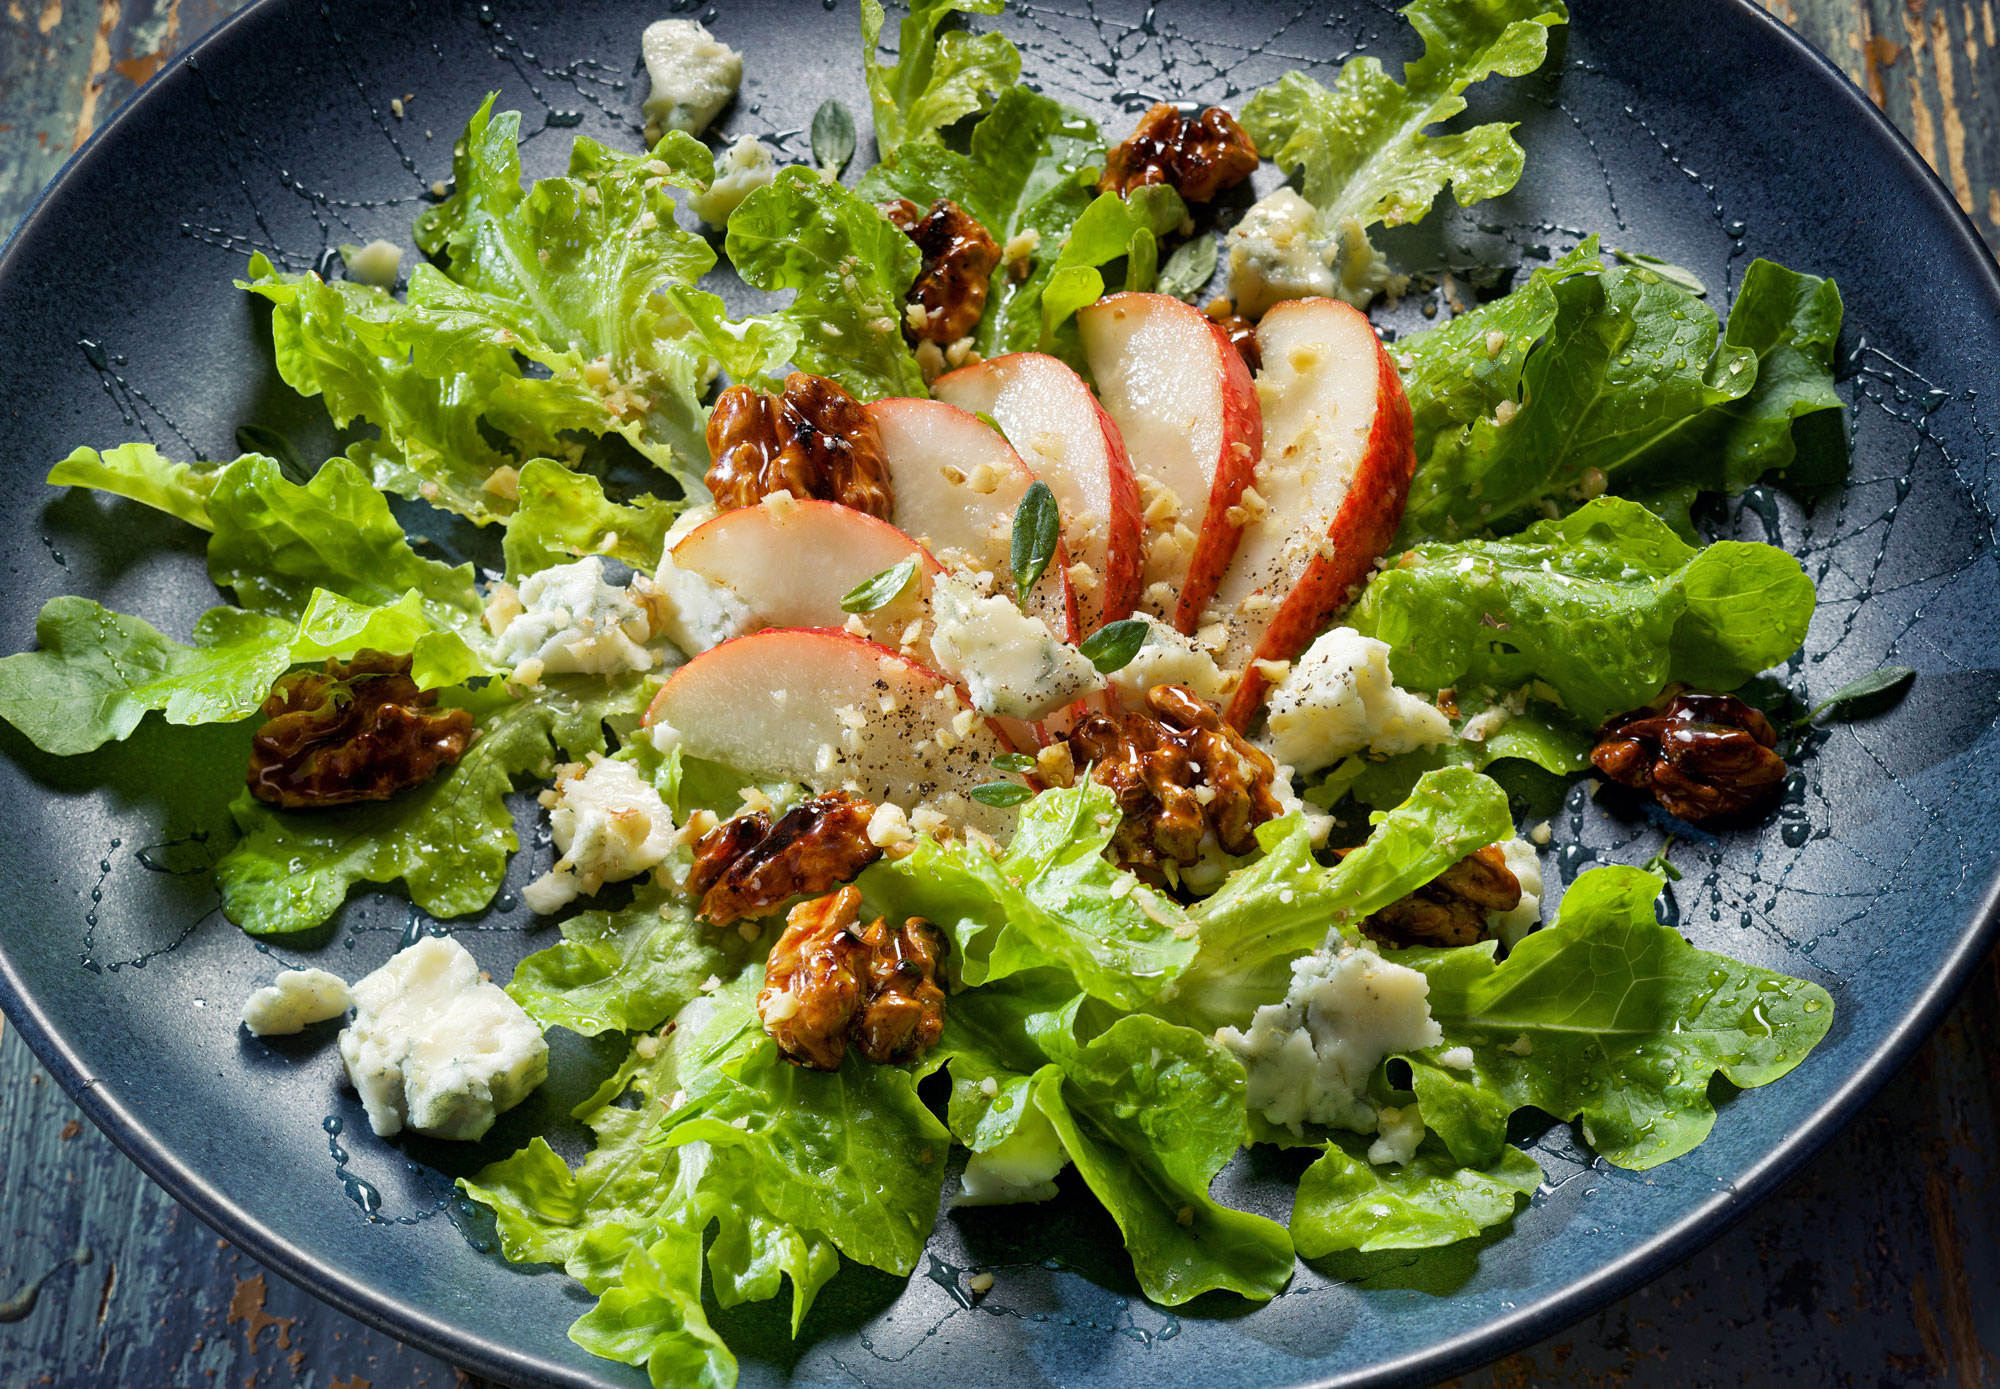 What are some good walnut and pear salad recipes?